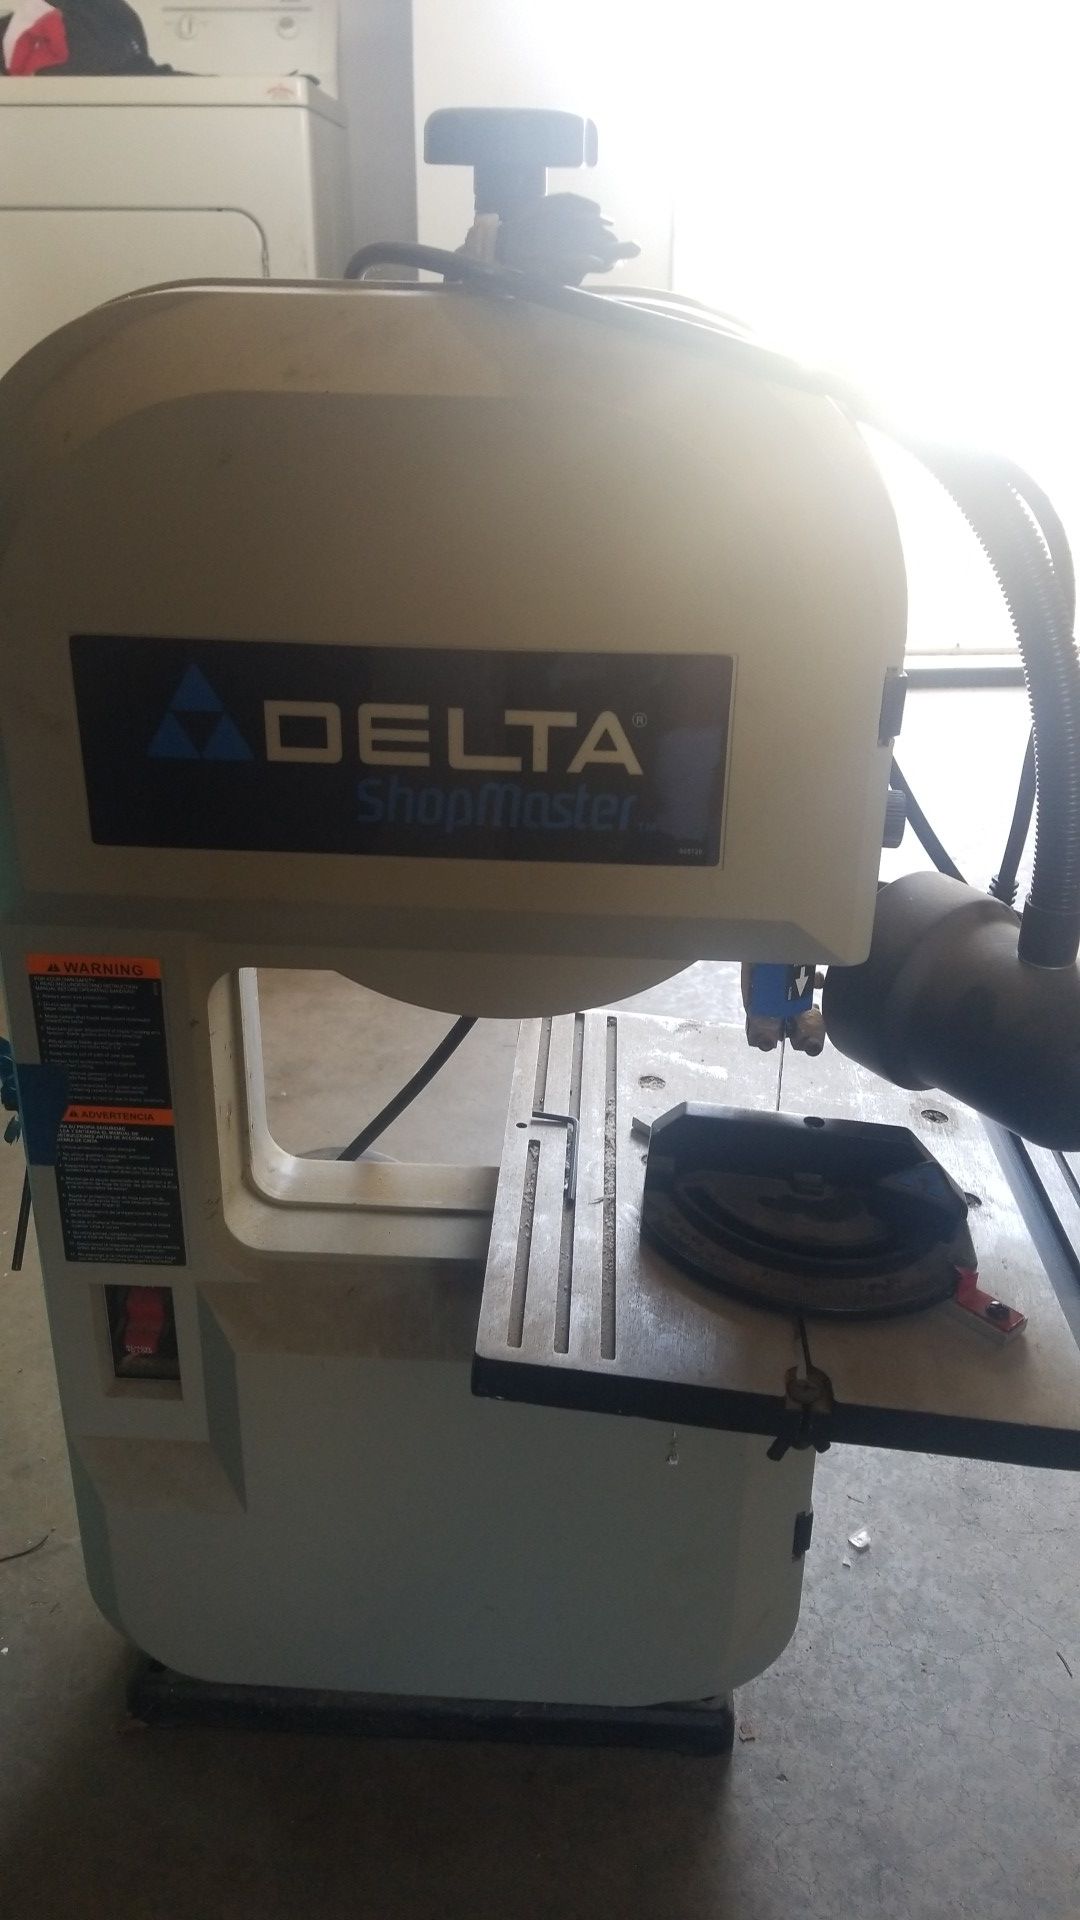 delta shopmaster table saw bs100